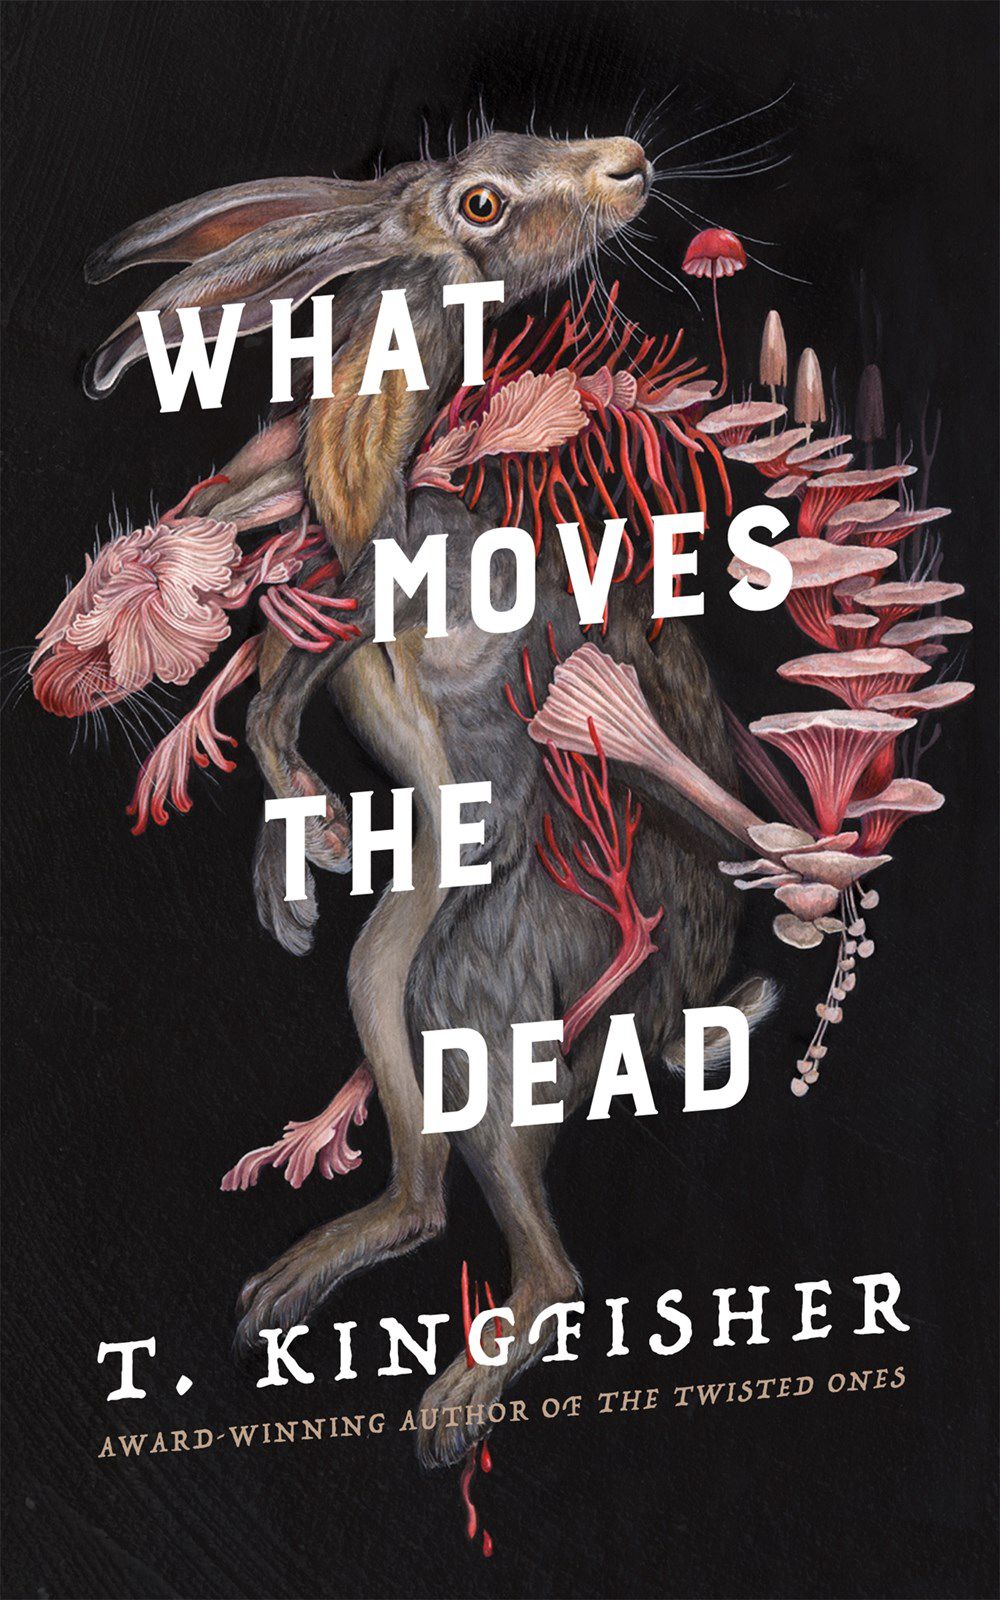 The cover of What Moves the Dead by T. Kingfisher, a surreal image of a rabbit interspersed with a rabbit skeleton made of mushrooms.